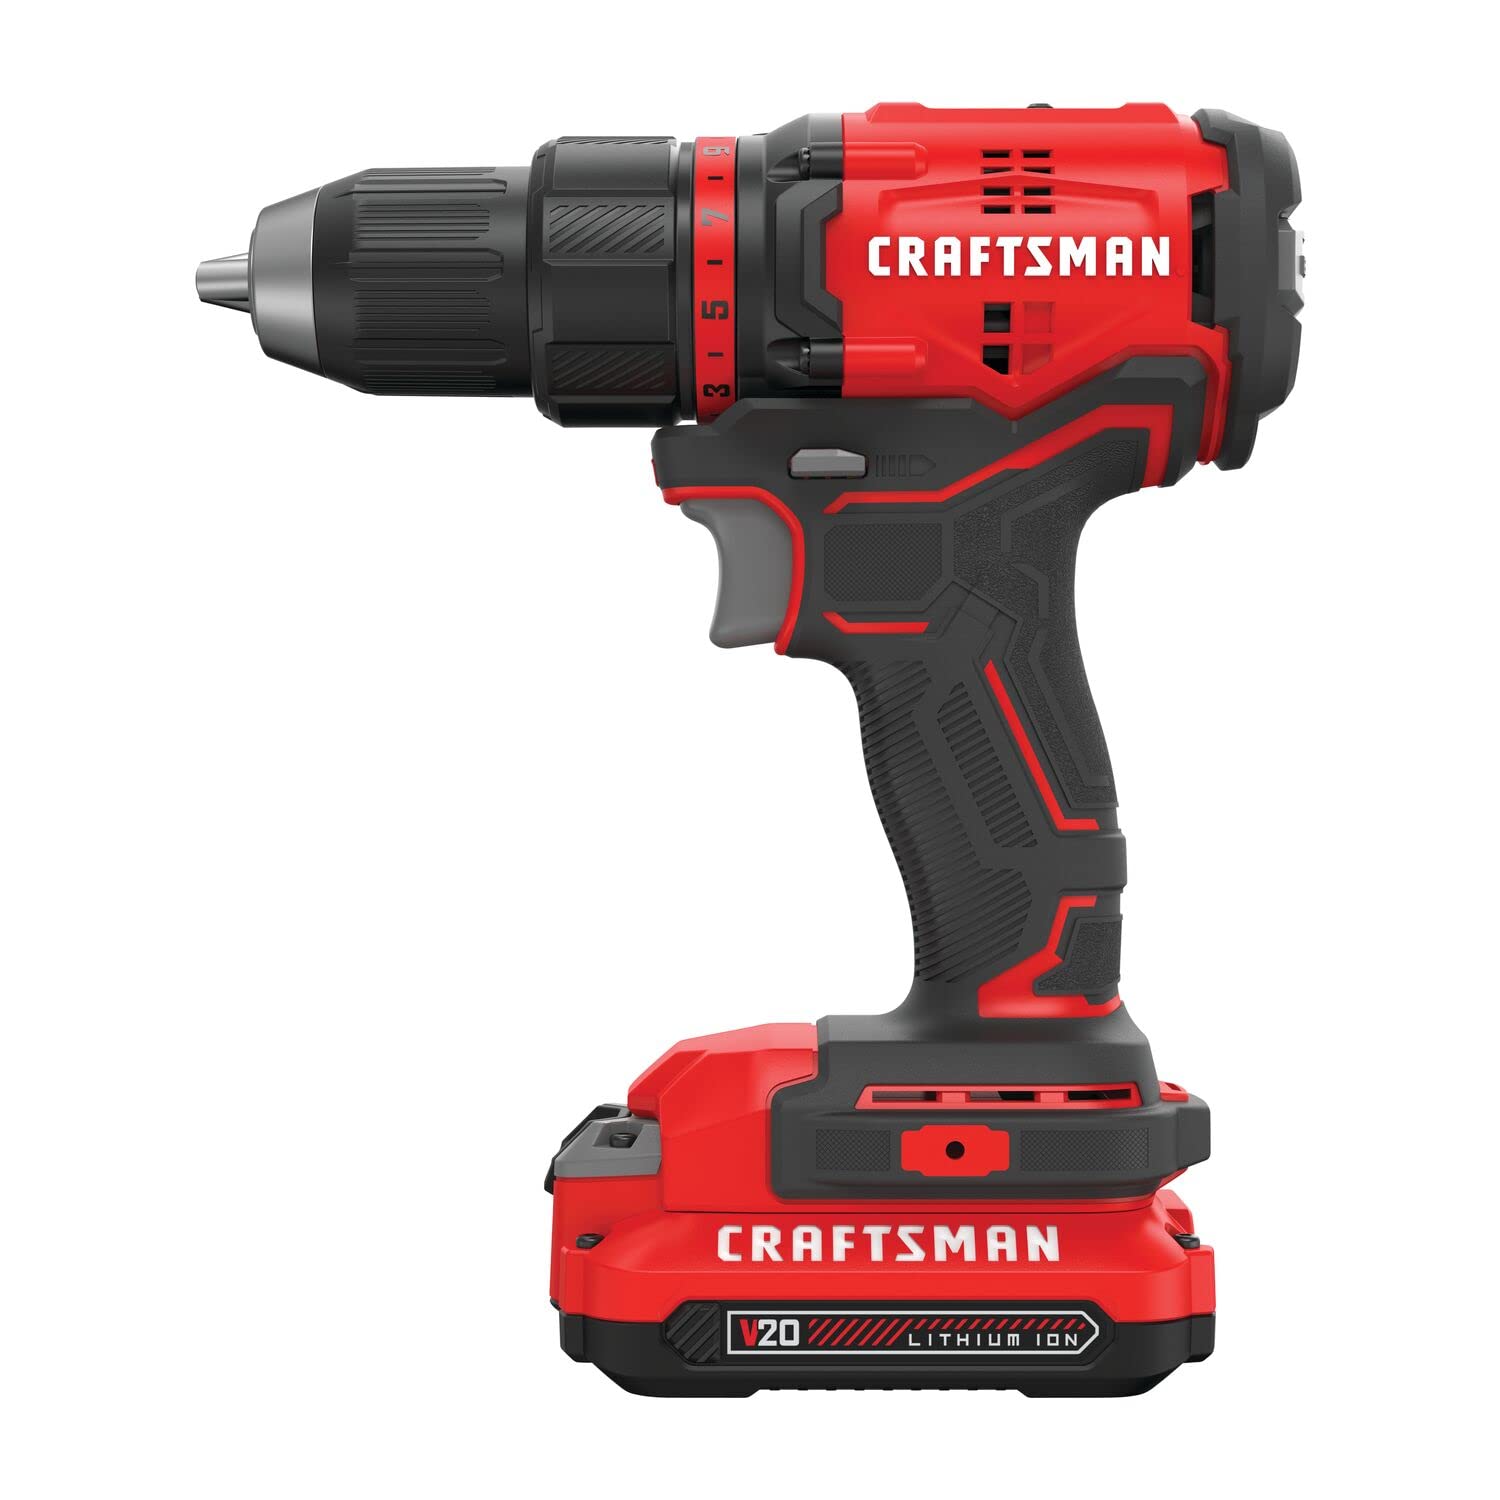 CRAFTSMAN V20 Cordless Drill/Driver Kit, 1/2 inch, Battery and Charger Included (CMCD710C2)